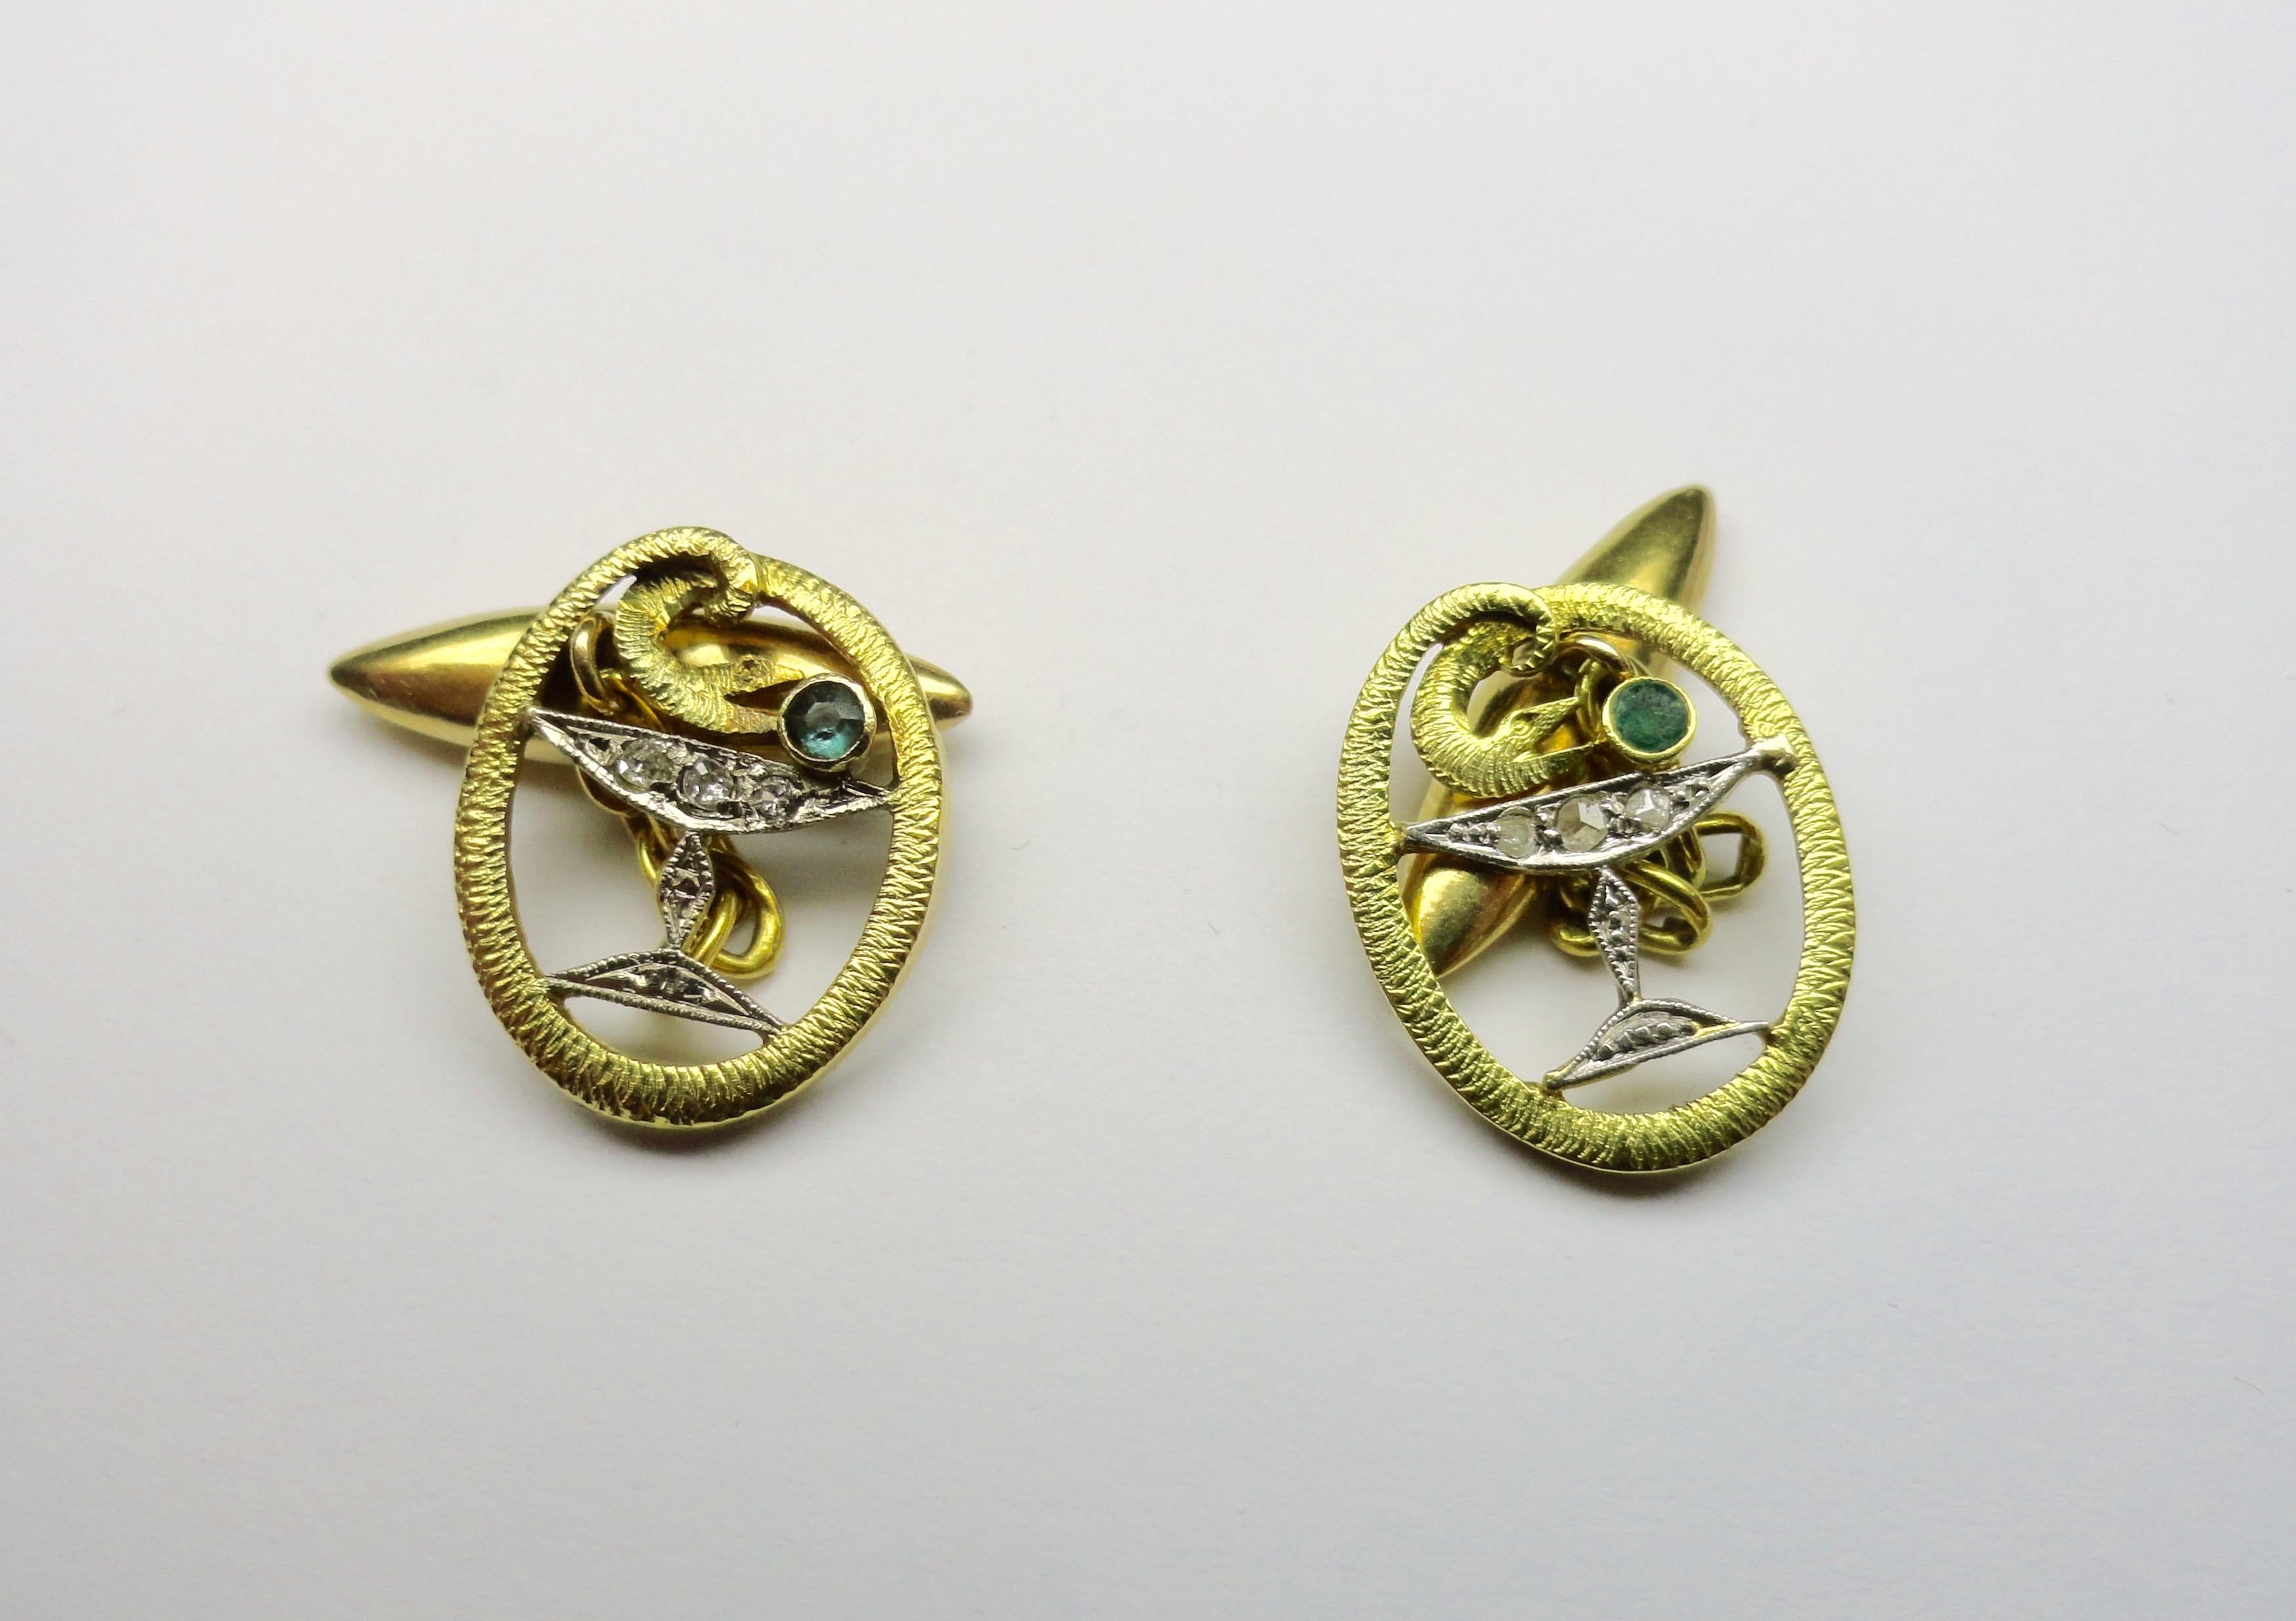 Cufflinks in 18KT gold with old cut diamonds and emeralds, with snake design from the 1930s.